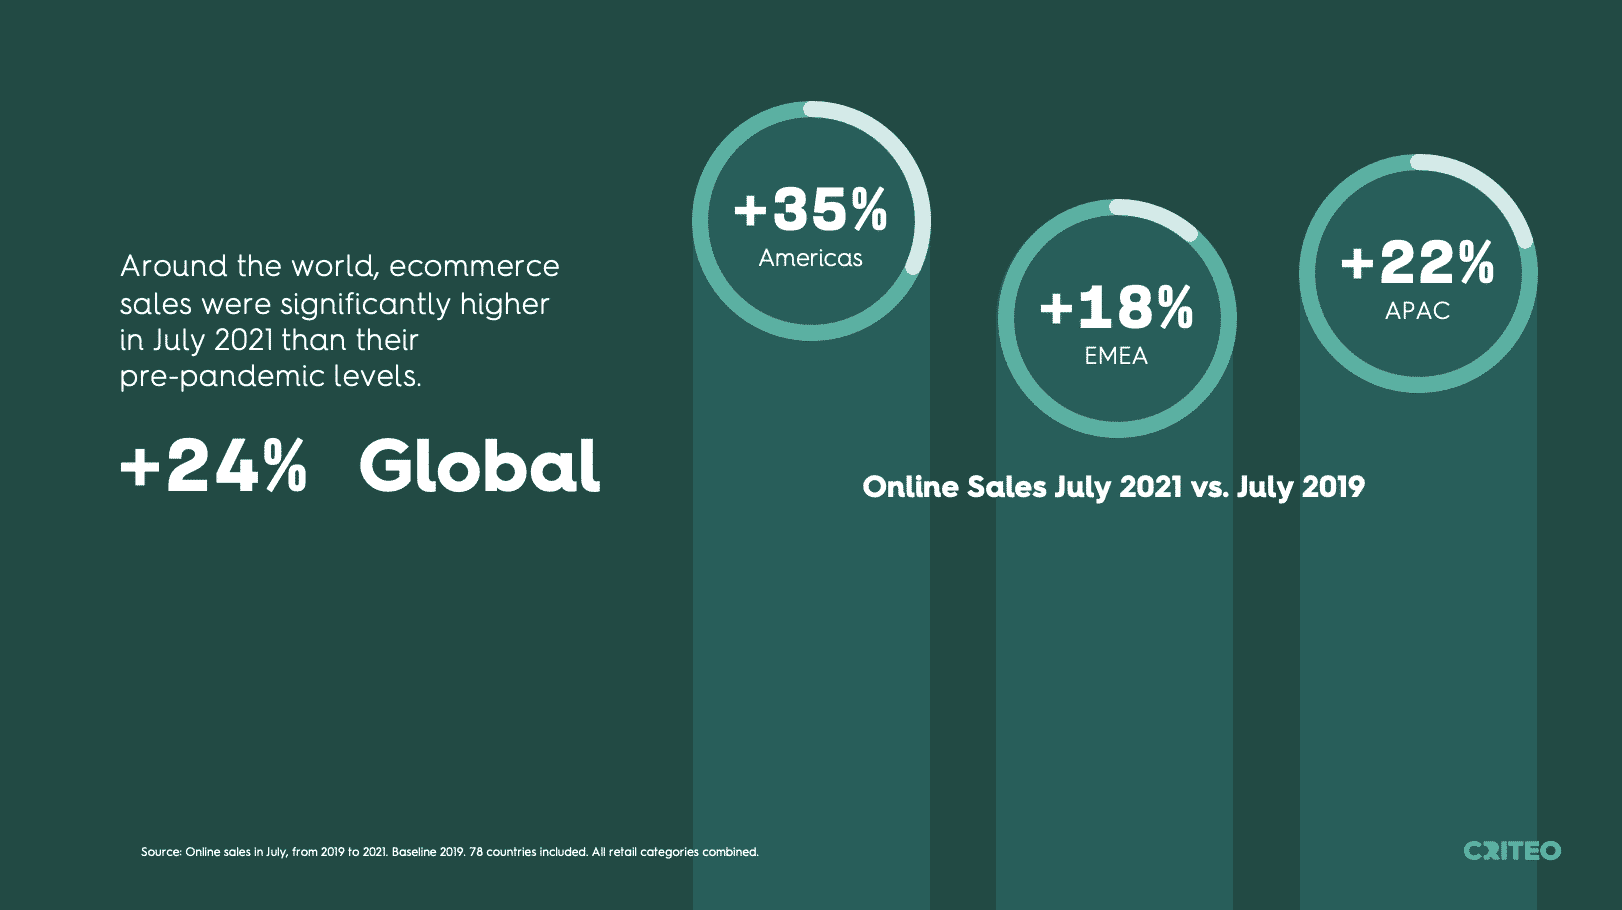 Around the world, ecommerce sales were significantly higher in July 2021 than their pre-pandemic levels.